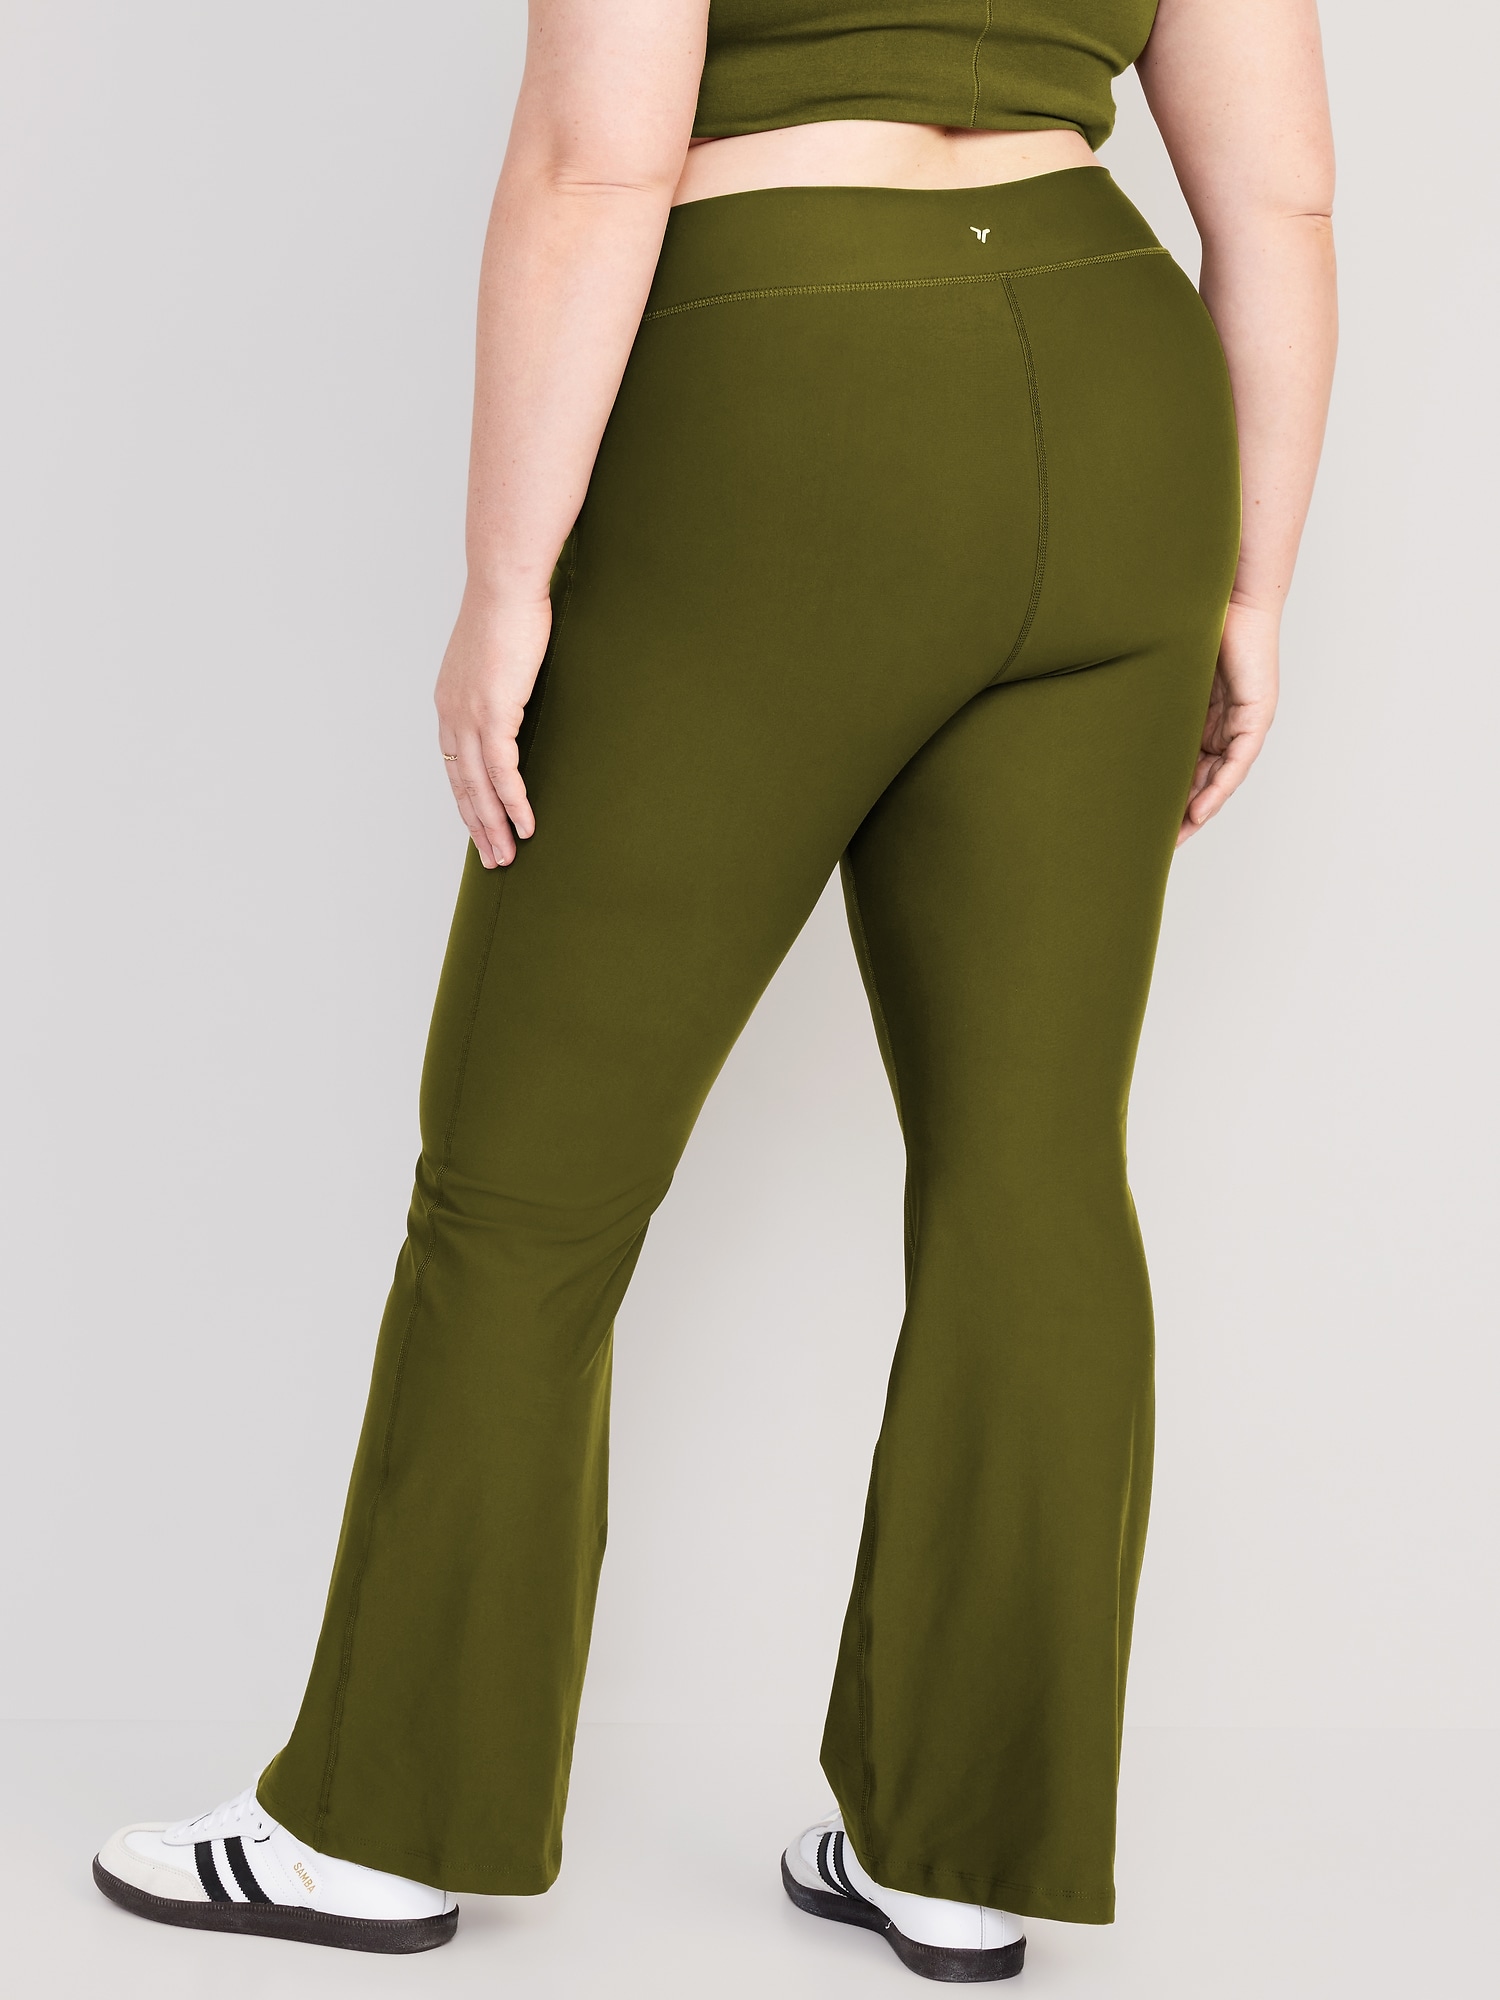 Old Navy Active Powersoft Extra High Rise Leggings Size XXL - $21 - From  Erin